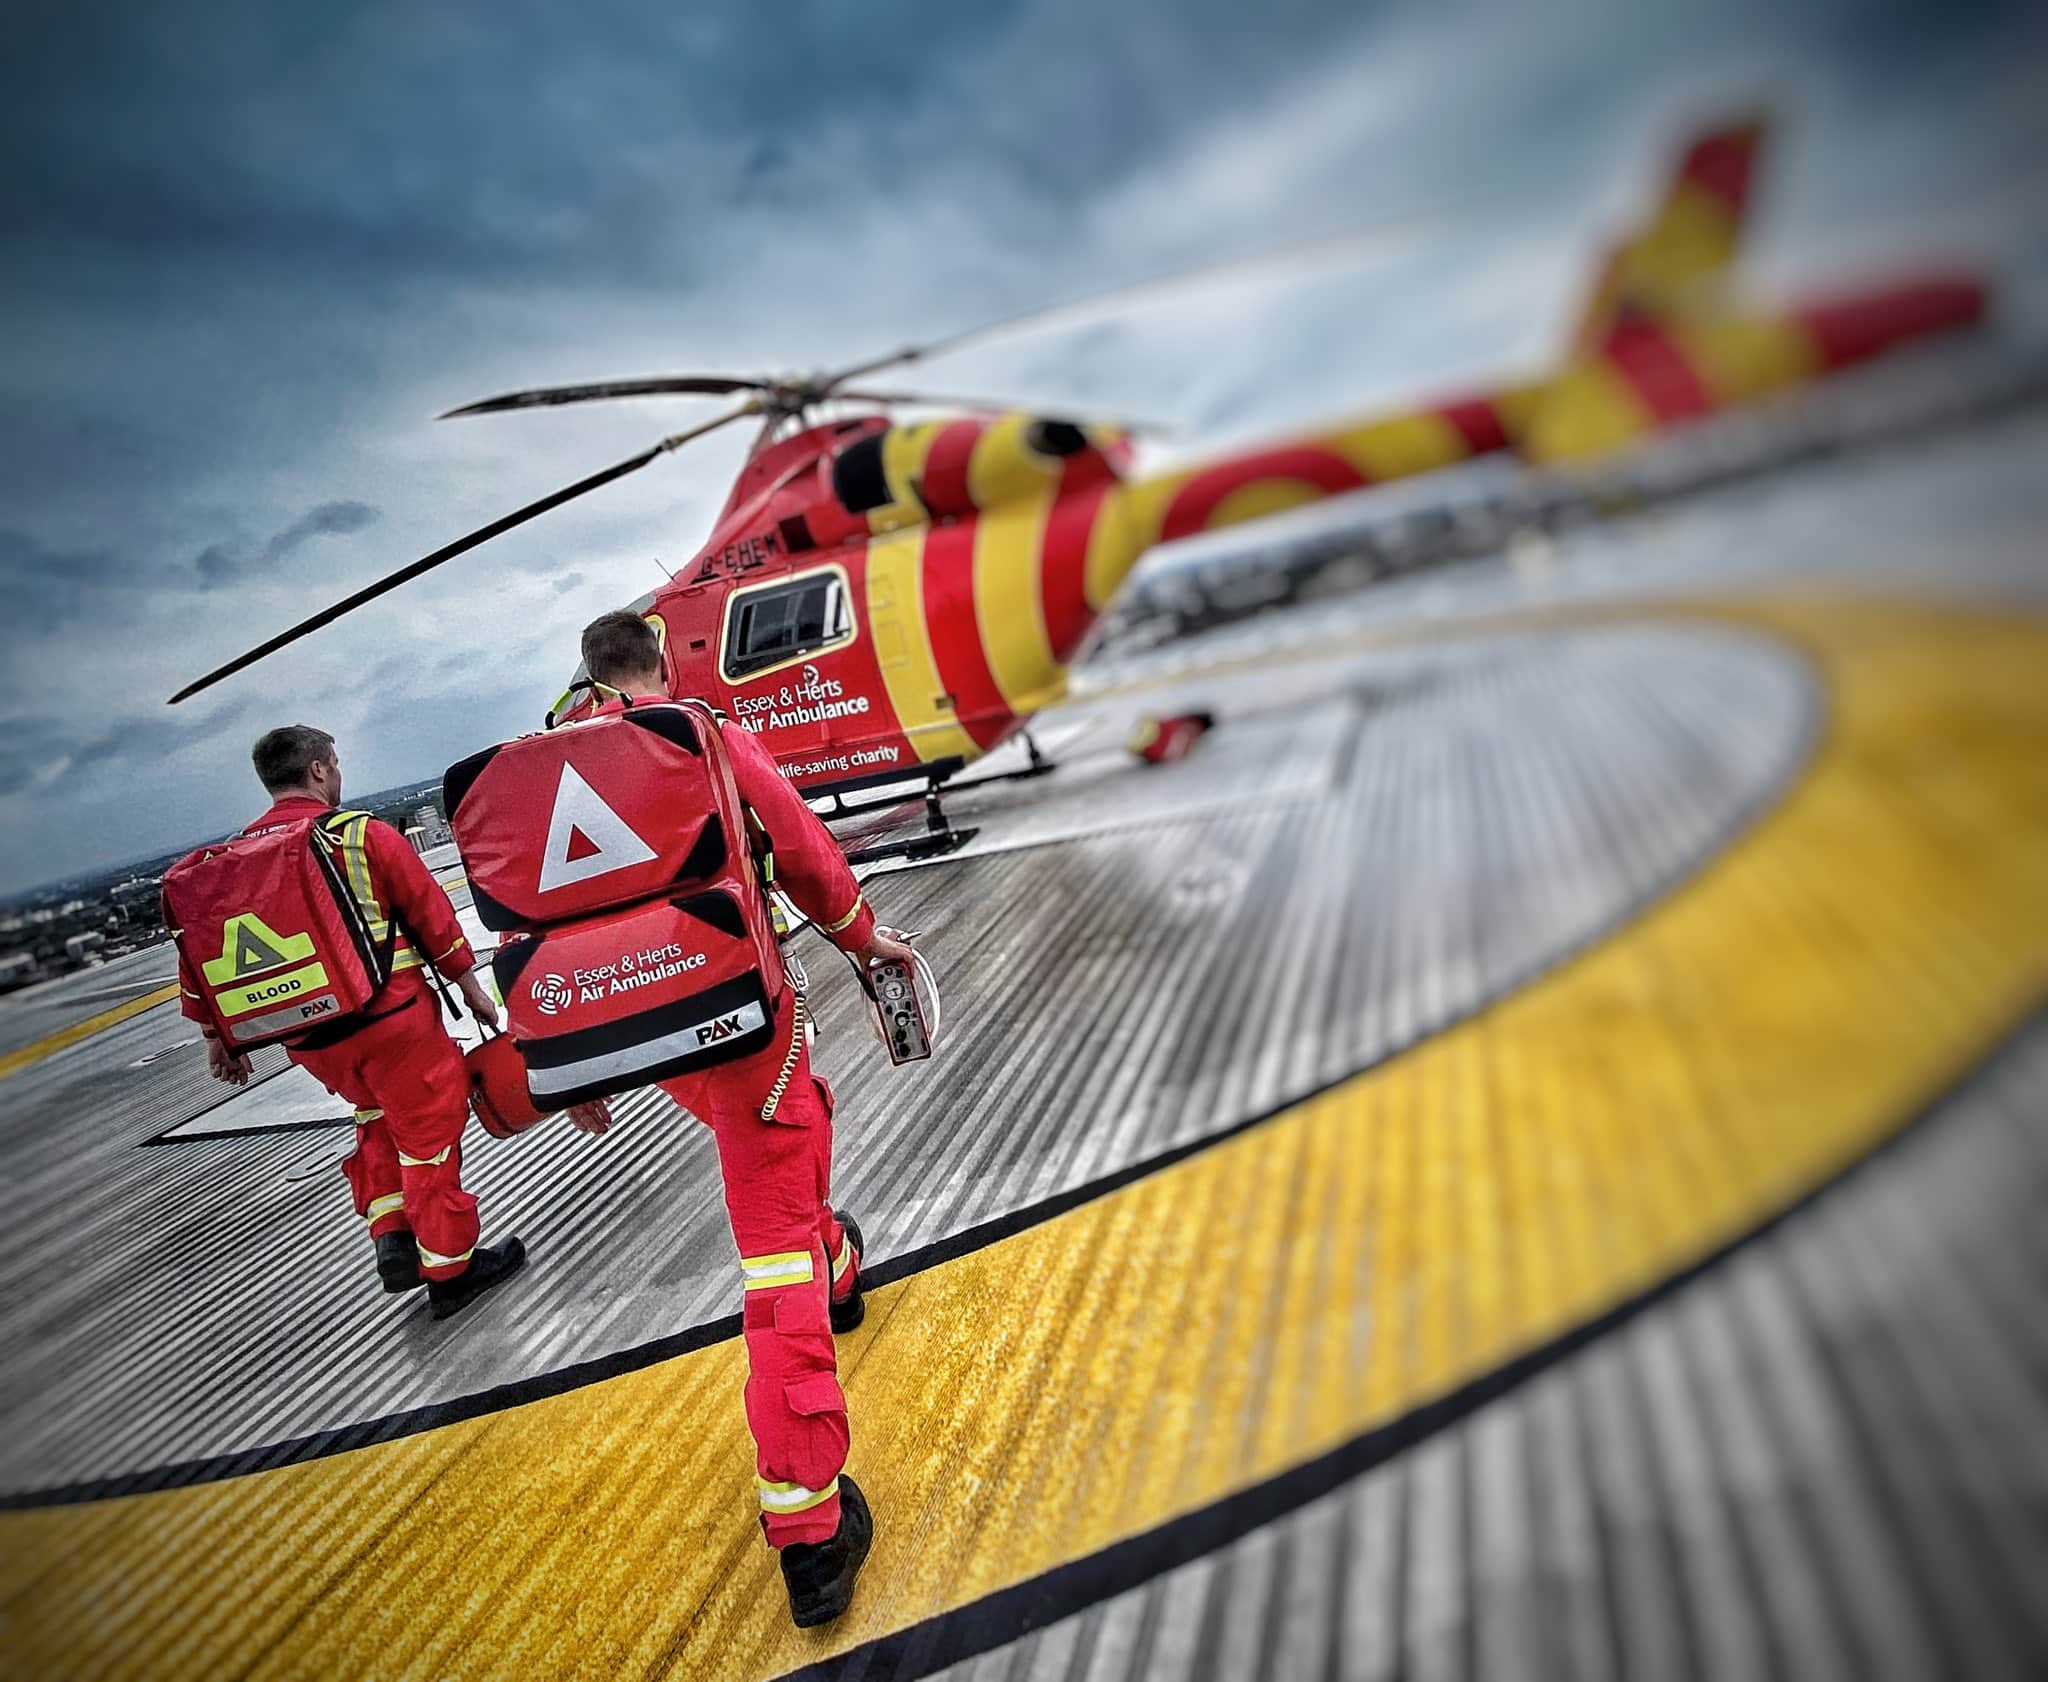 Paramedic and Doctor walking towards the helicopter on London Hospital roof after a mission